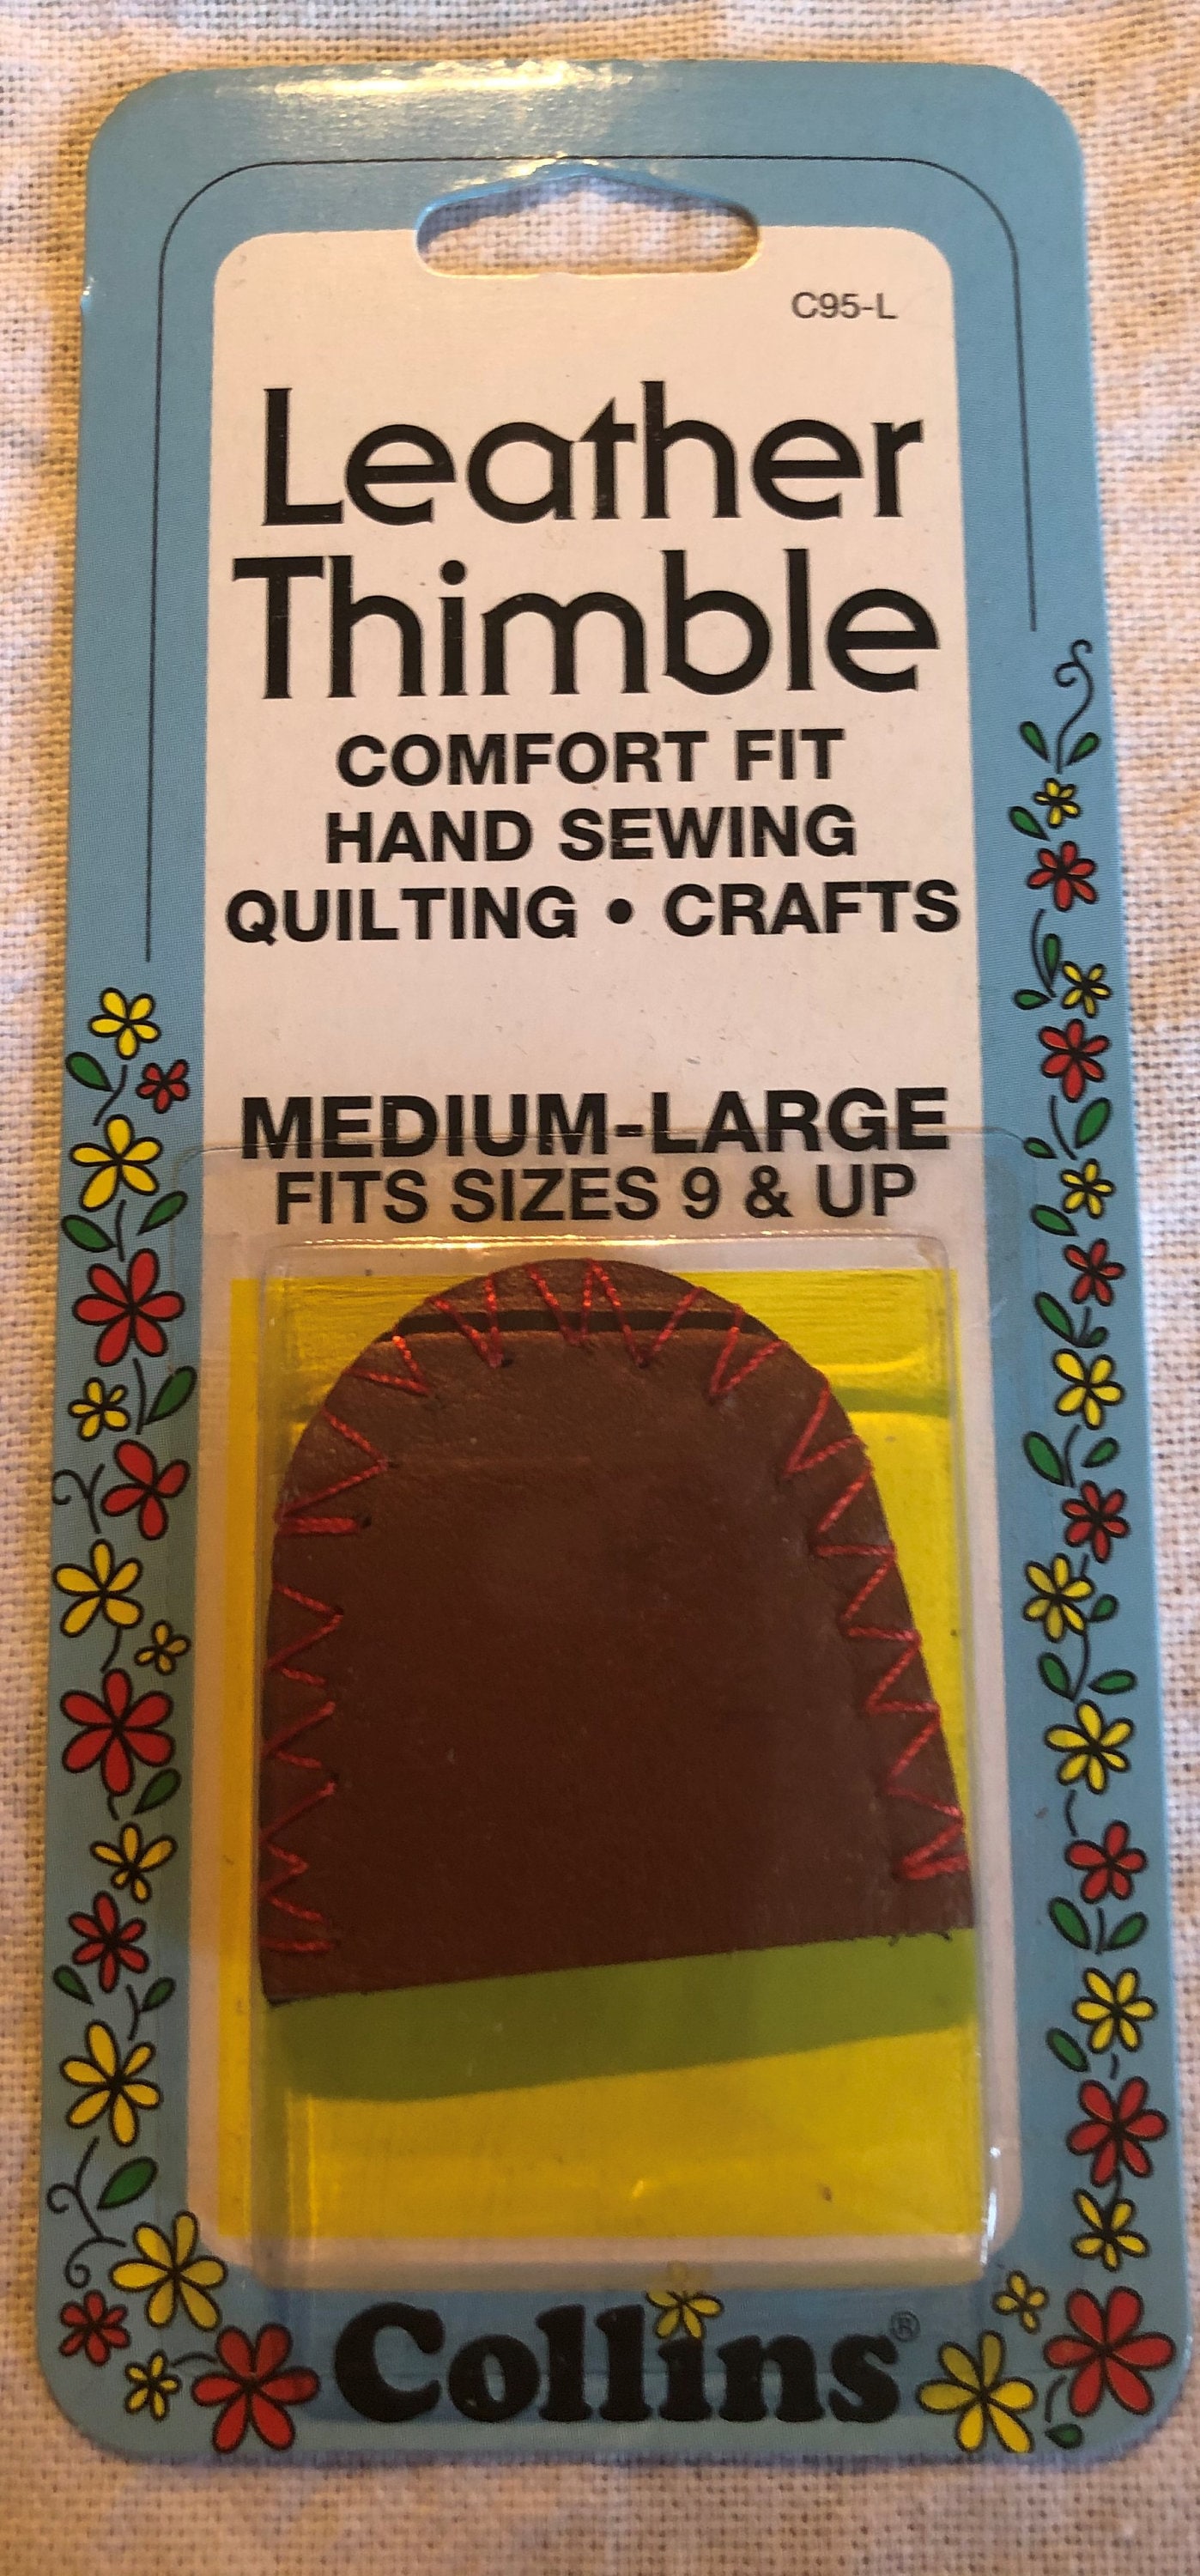 Leather Thimble Size Small - 98462 - Bohin – The Sewing House, Inc